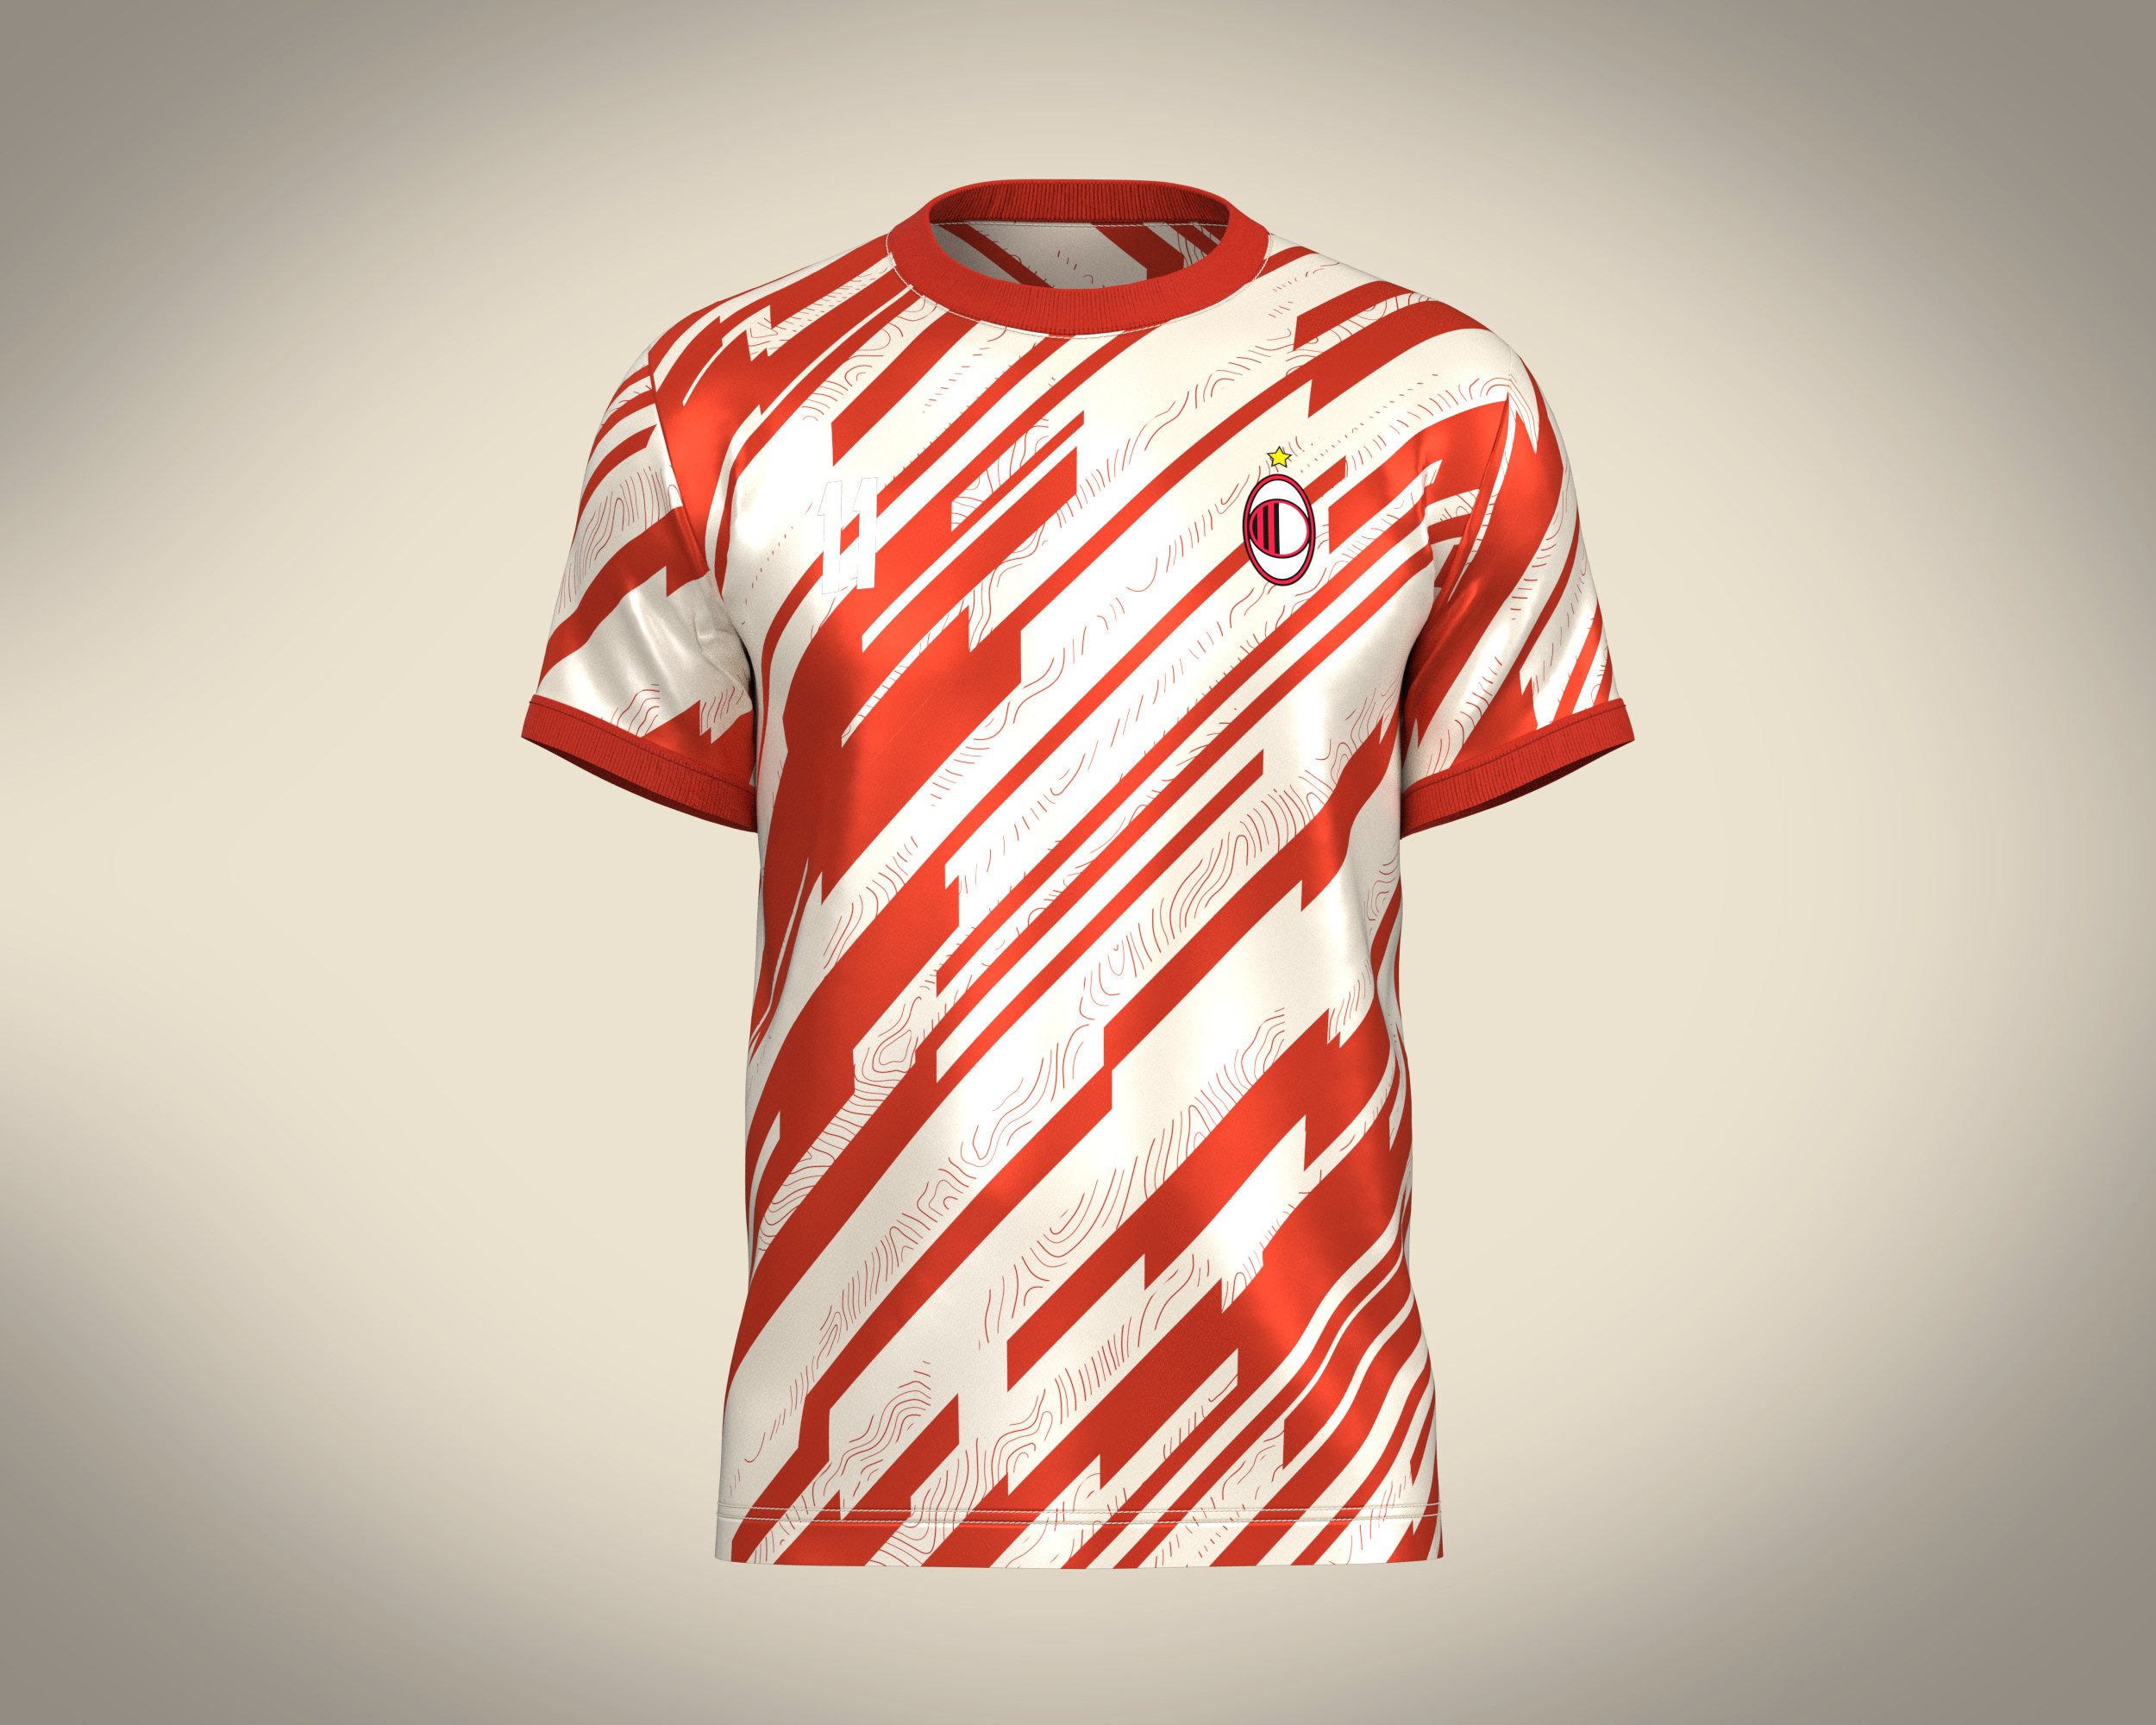 ArtStation - Soccer Football Red and Blue color Jersey Player-11